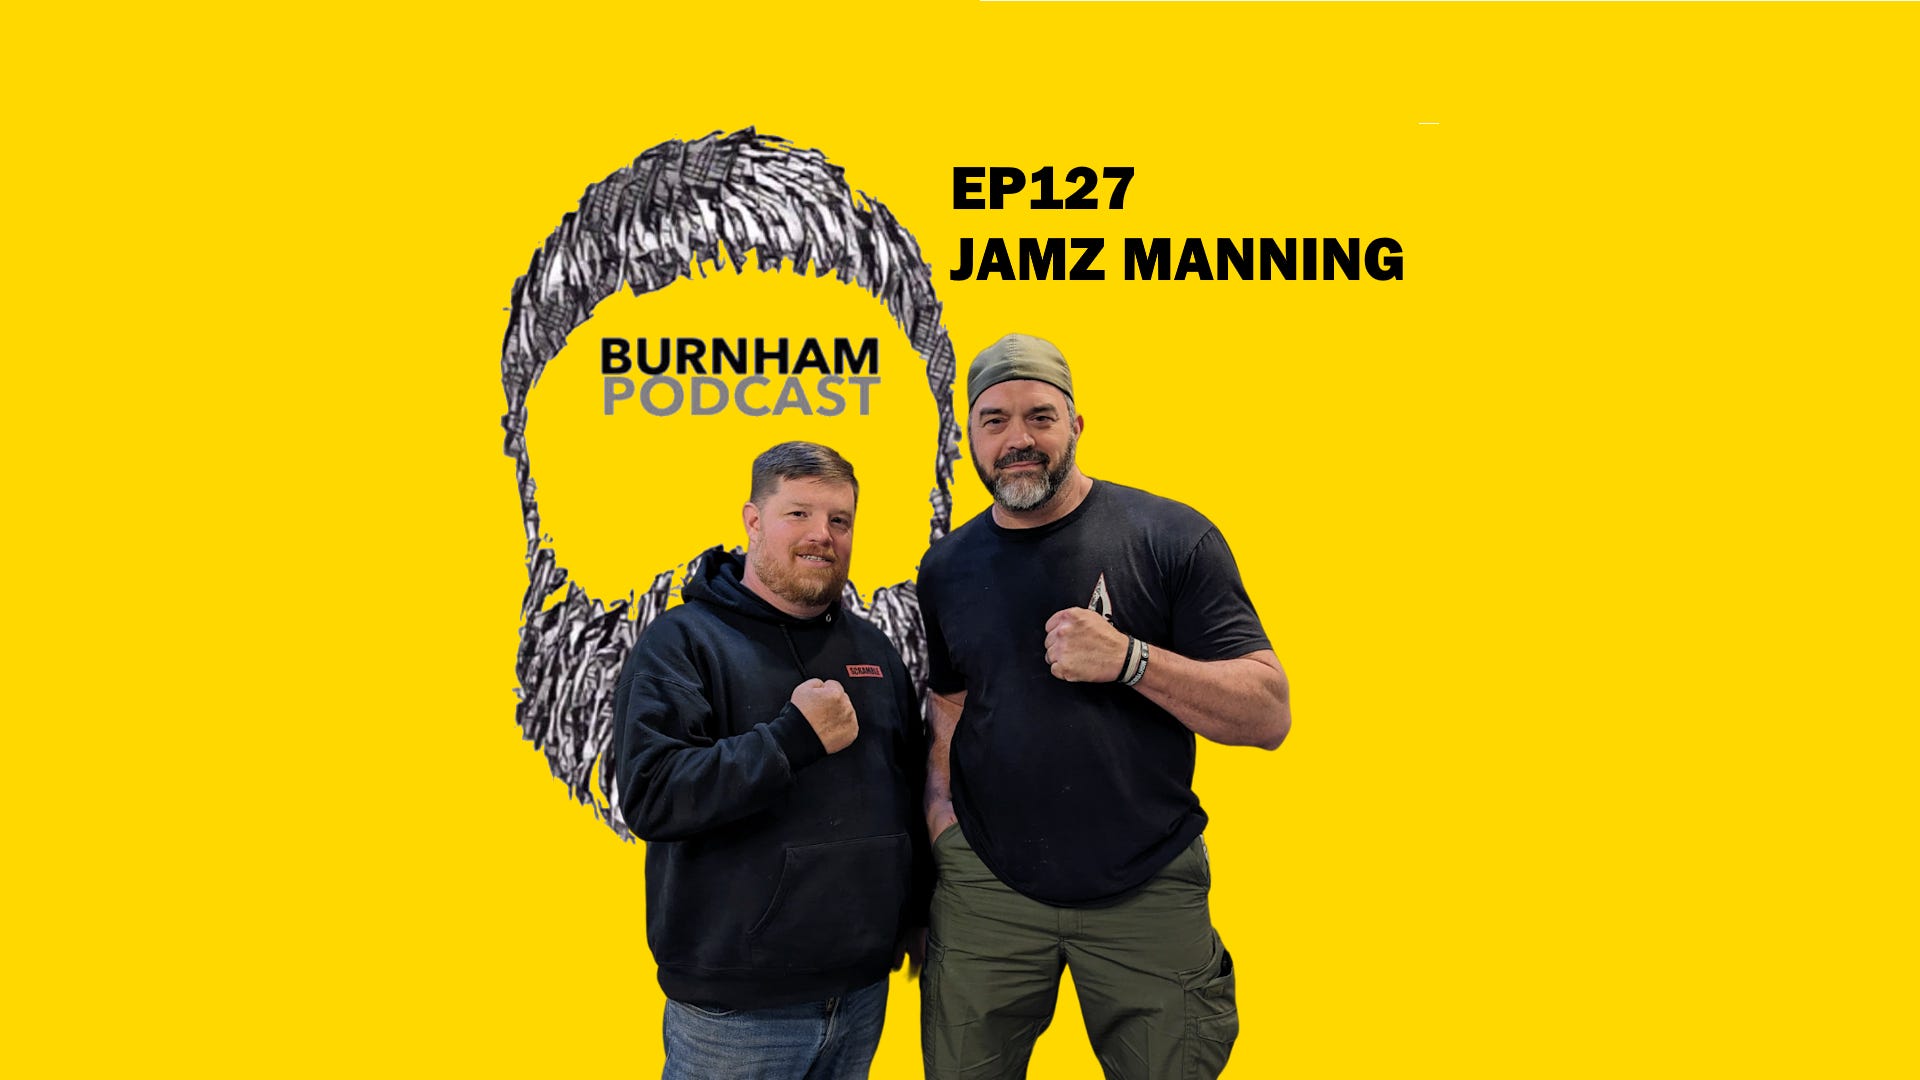 Burnham Podcast #127 The Long and Bumpy Road: with Jamz Manning